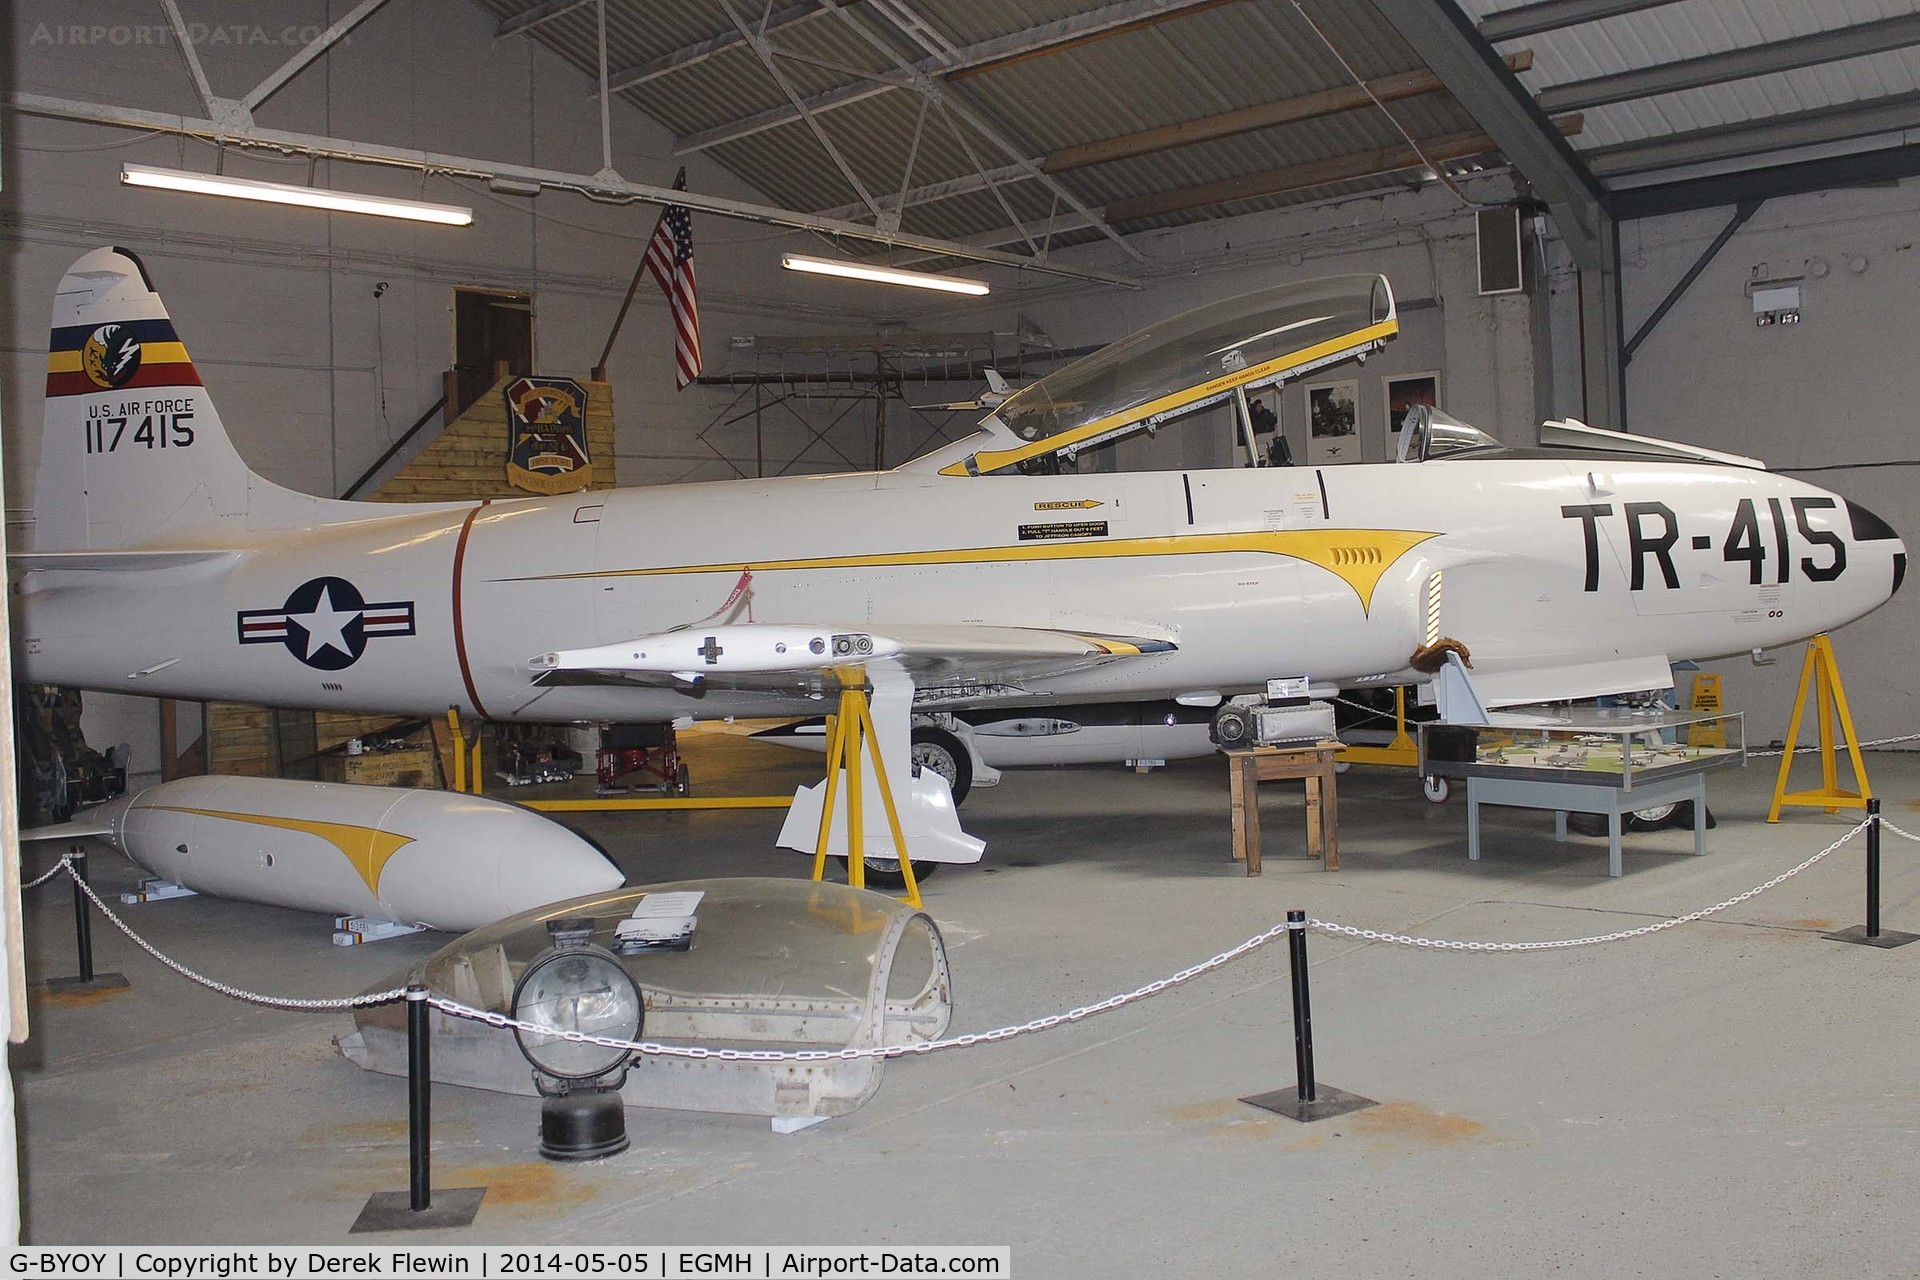 G-BYOY, Canadair T-33AN Silver Star 3 C/N T33-231, Seen at the RAF Manston History Museum.